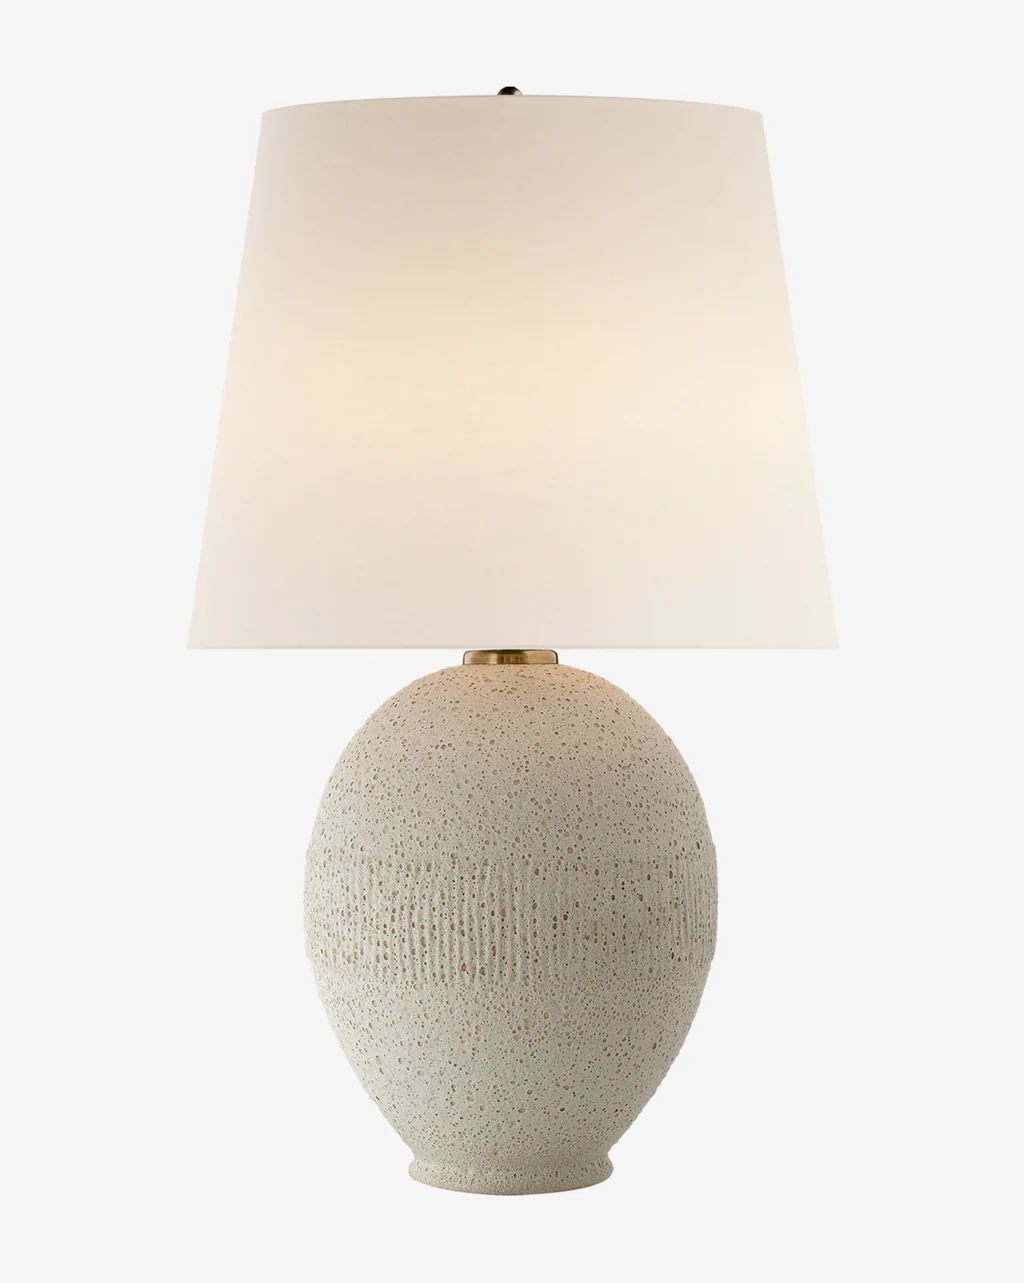 Toulon Table Lamp | McGee & Co.